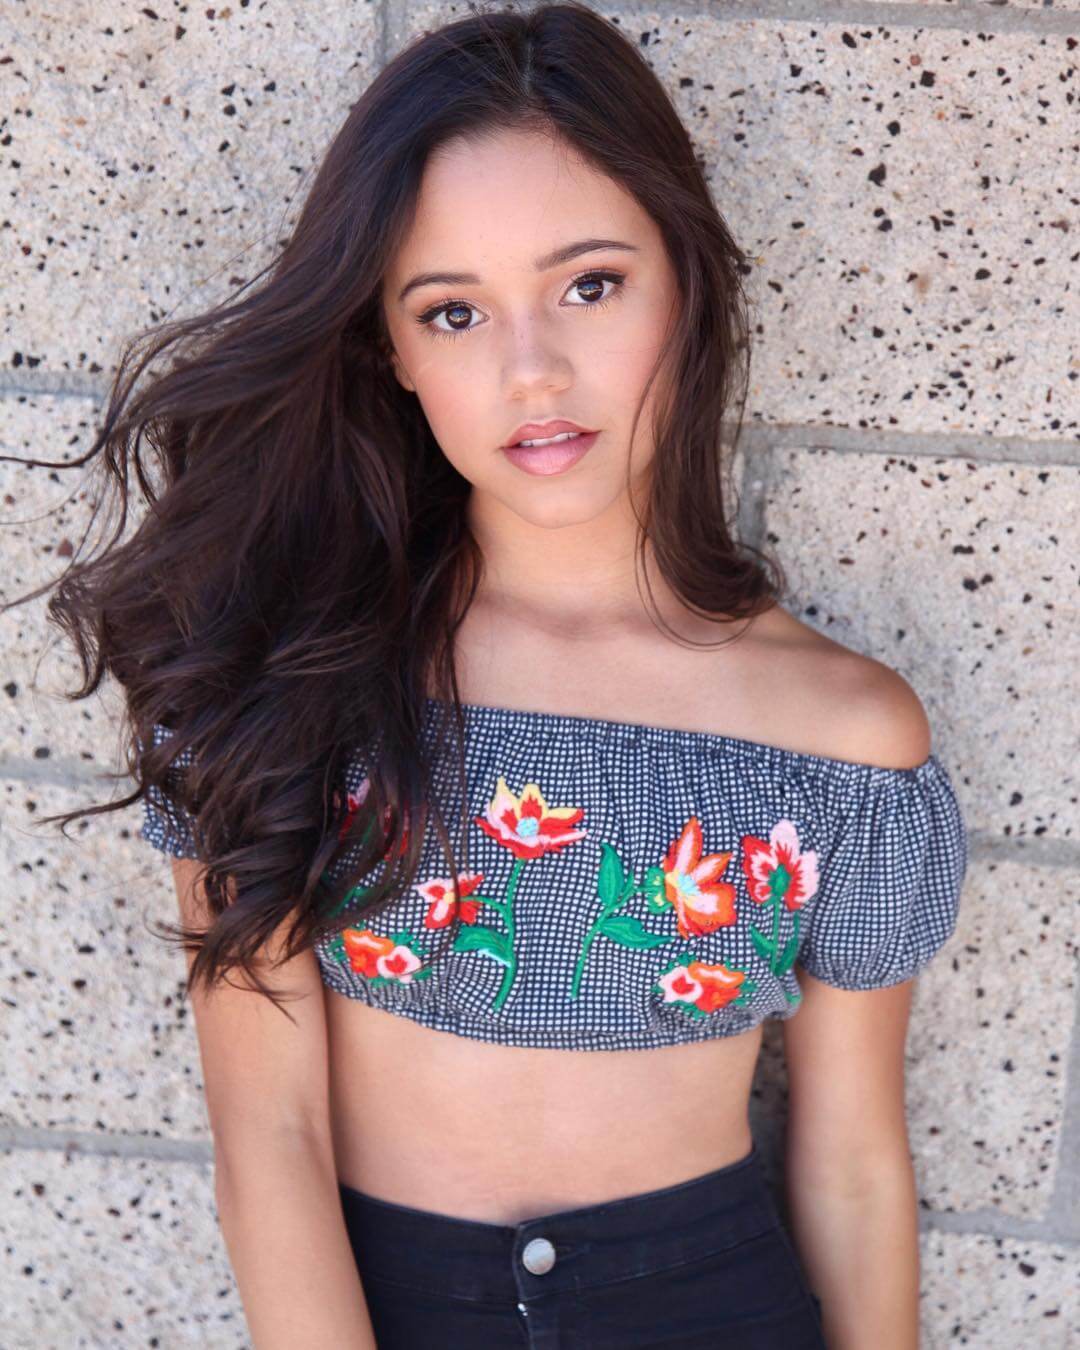 49 Hot Pictures Of Jenna Ortega Are Here To Take Your Breath.